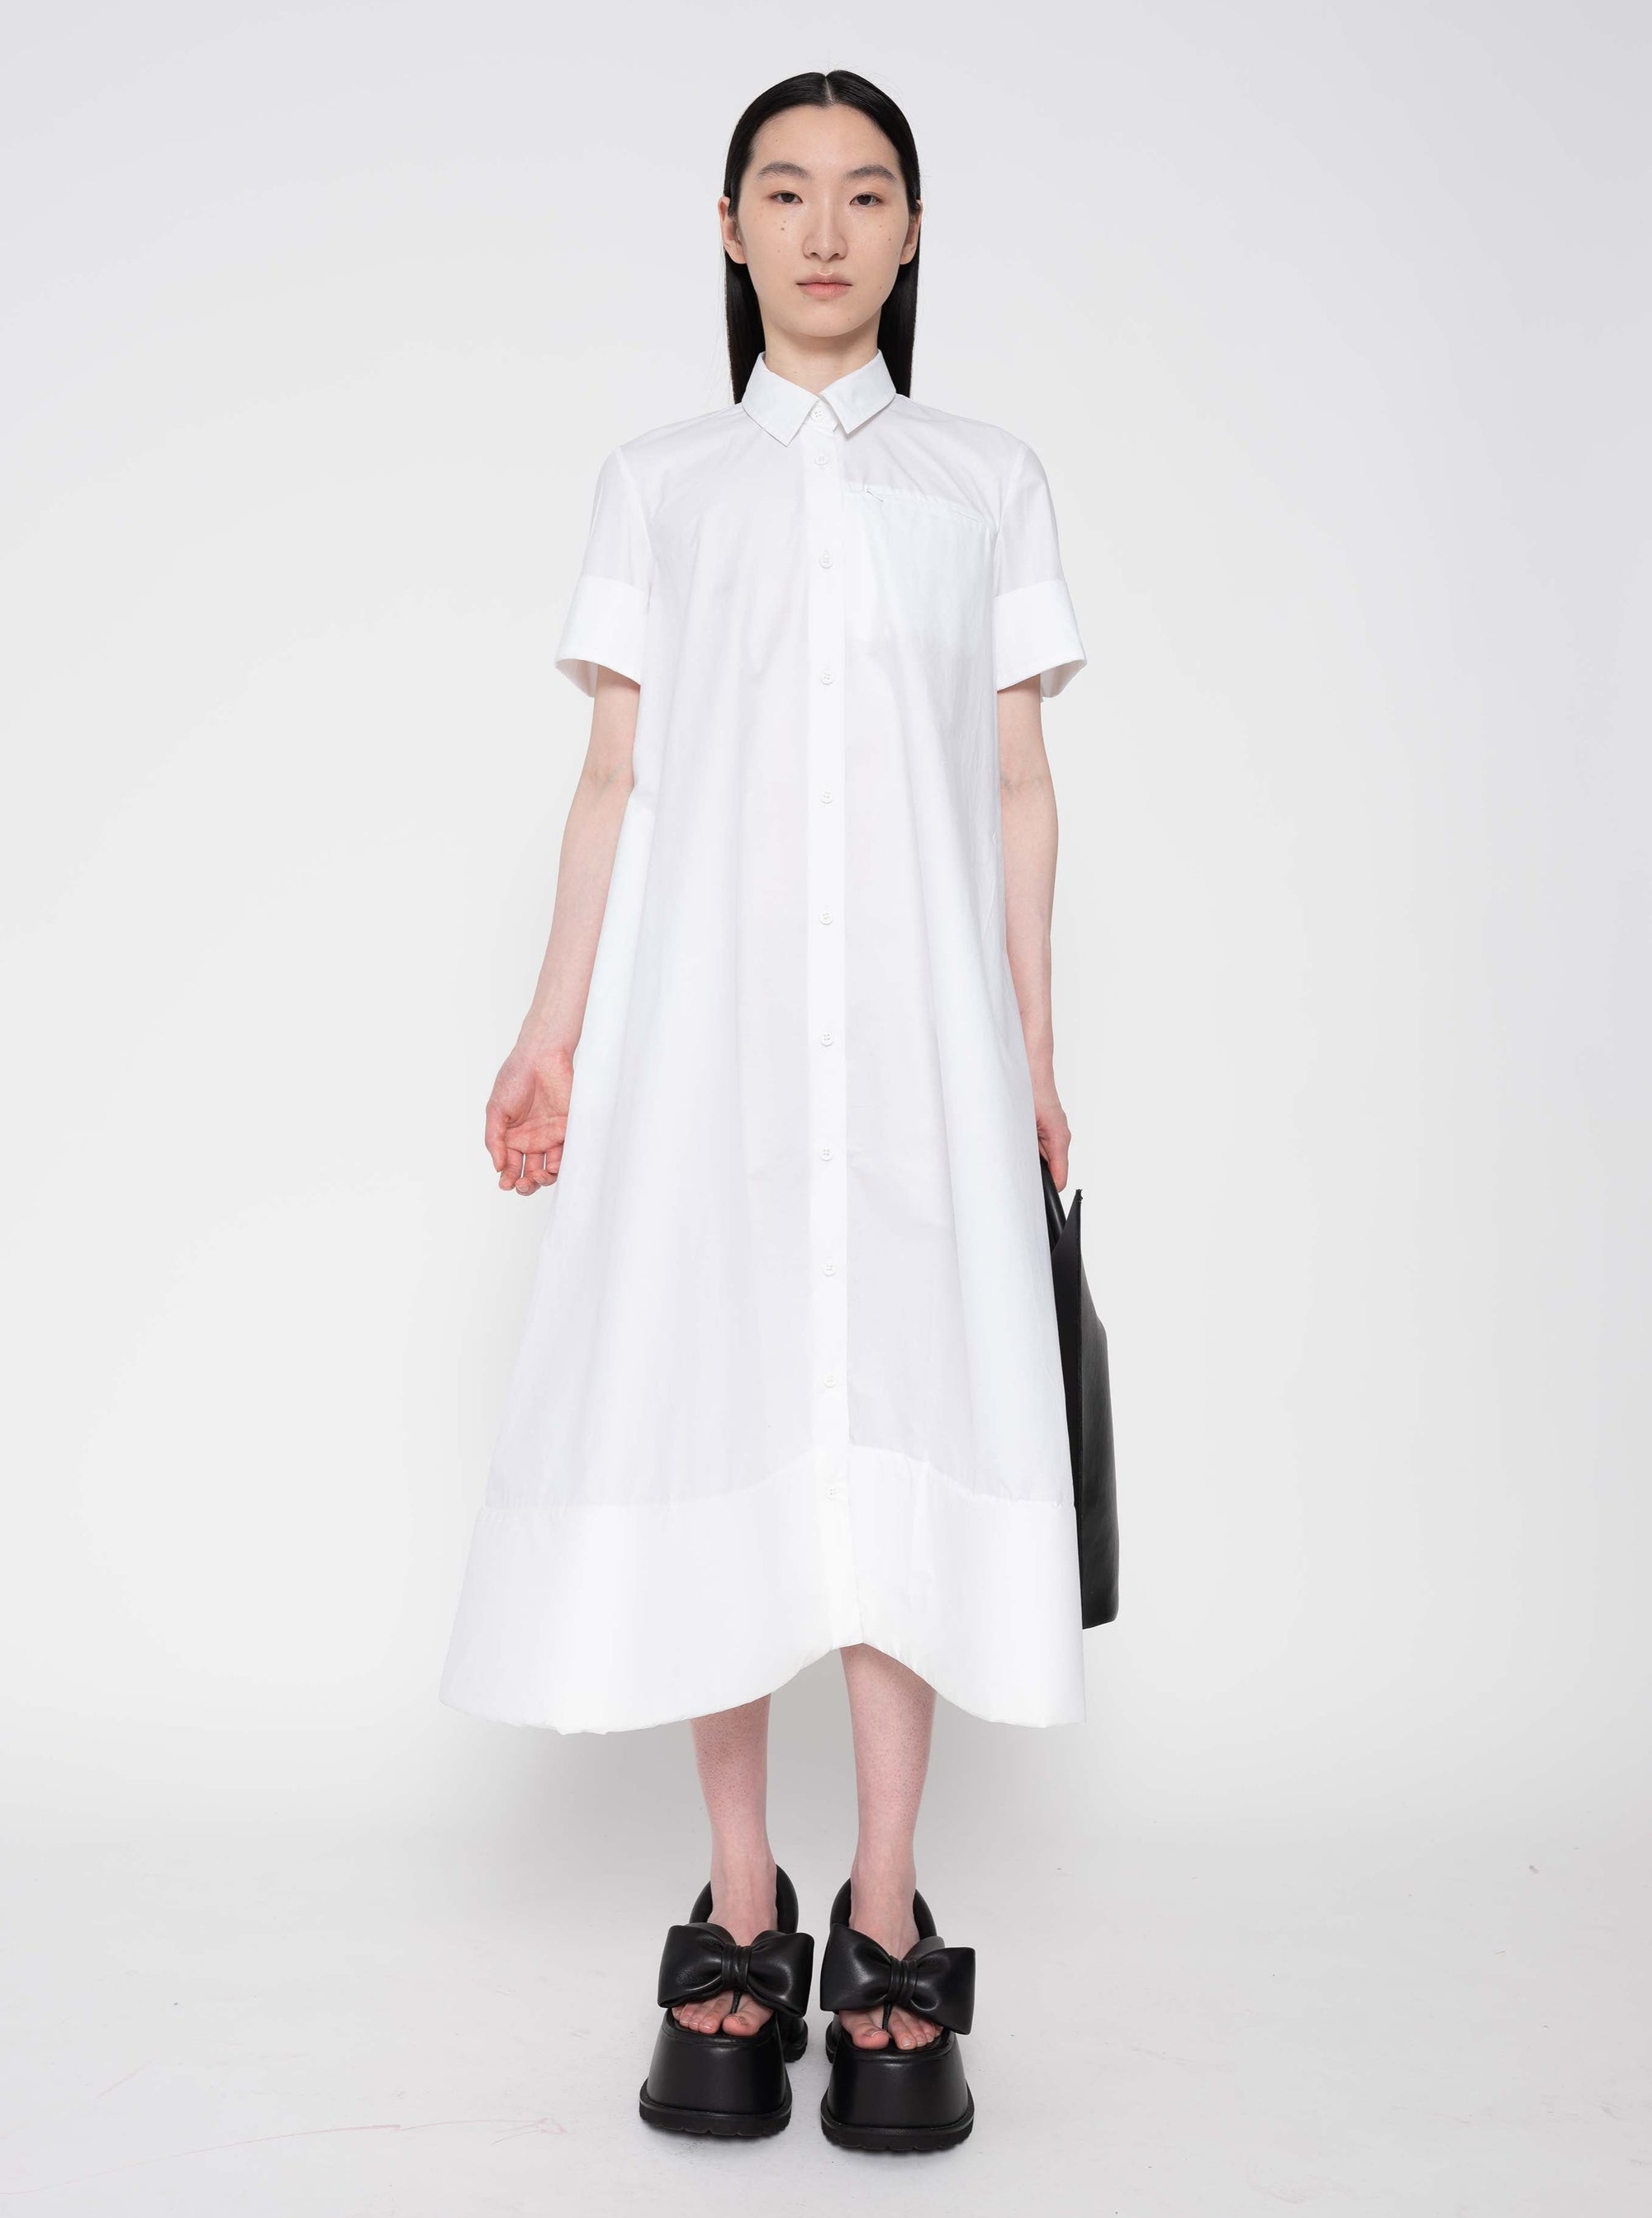 FRONT-VIEW-BRUNETTE-WOMAN-white-a-line-shaped-cotton-dress-with-foam-hem-detail-WEARING-BOW-PLATFORM-SANDALS-IN-BLACK